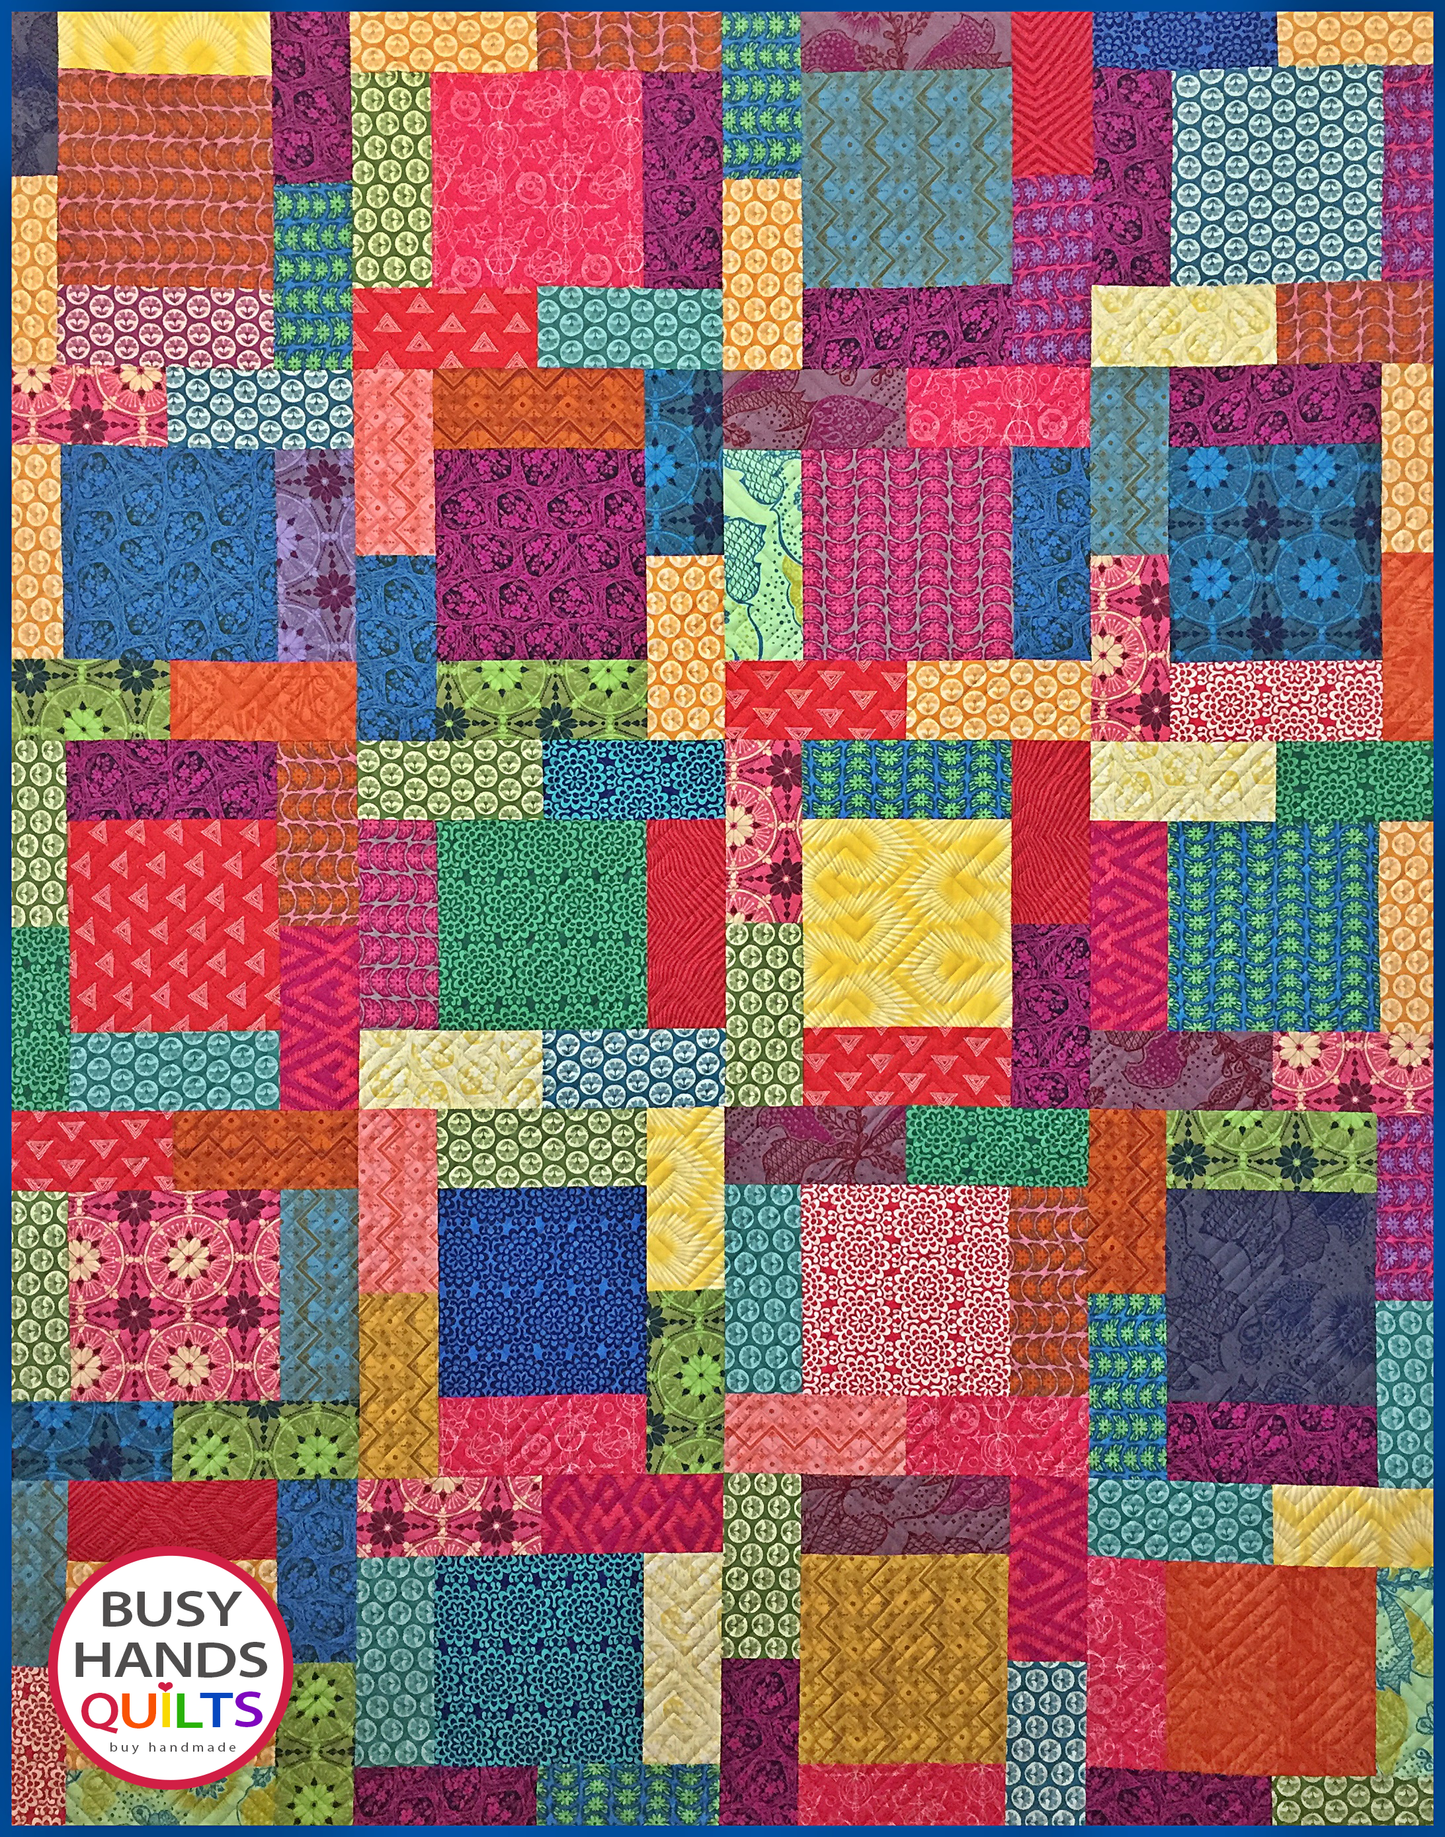 Rosewood Lane Quilt Pattern PDF DOWNLOAD Busy Hands Quilts $12.99